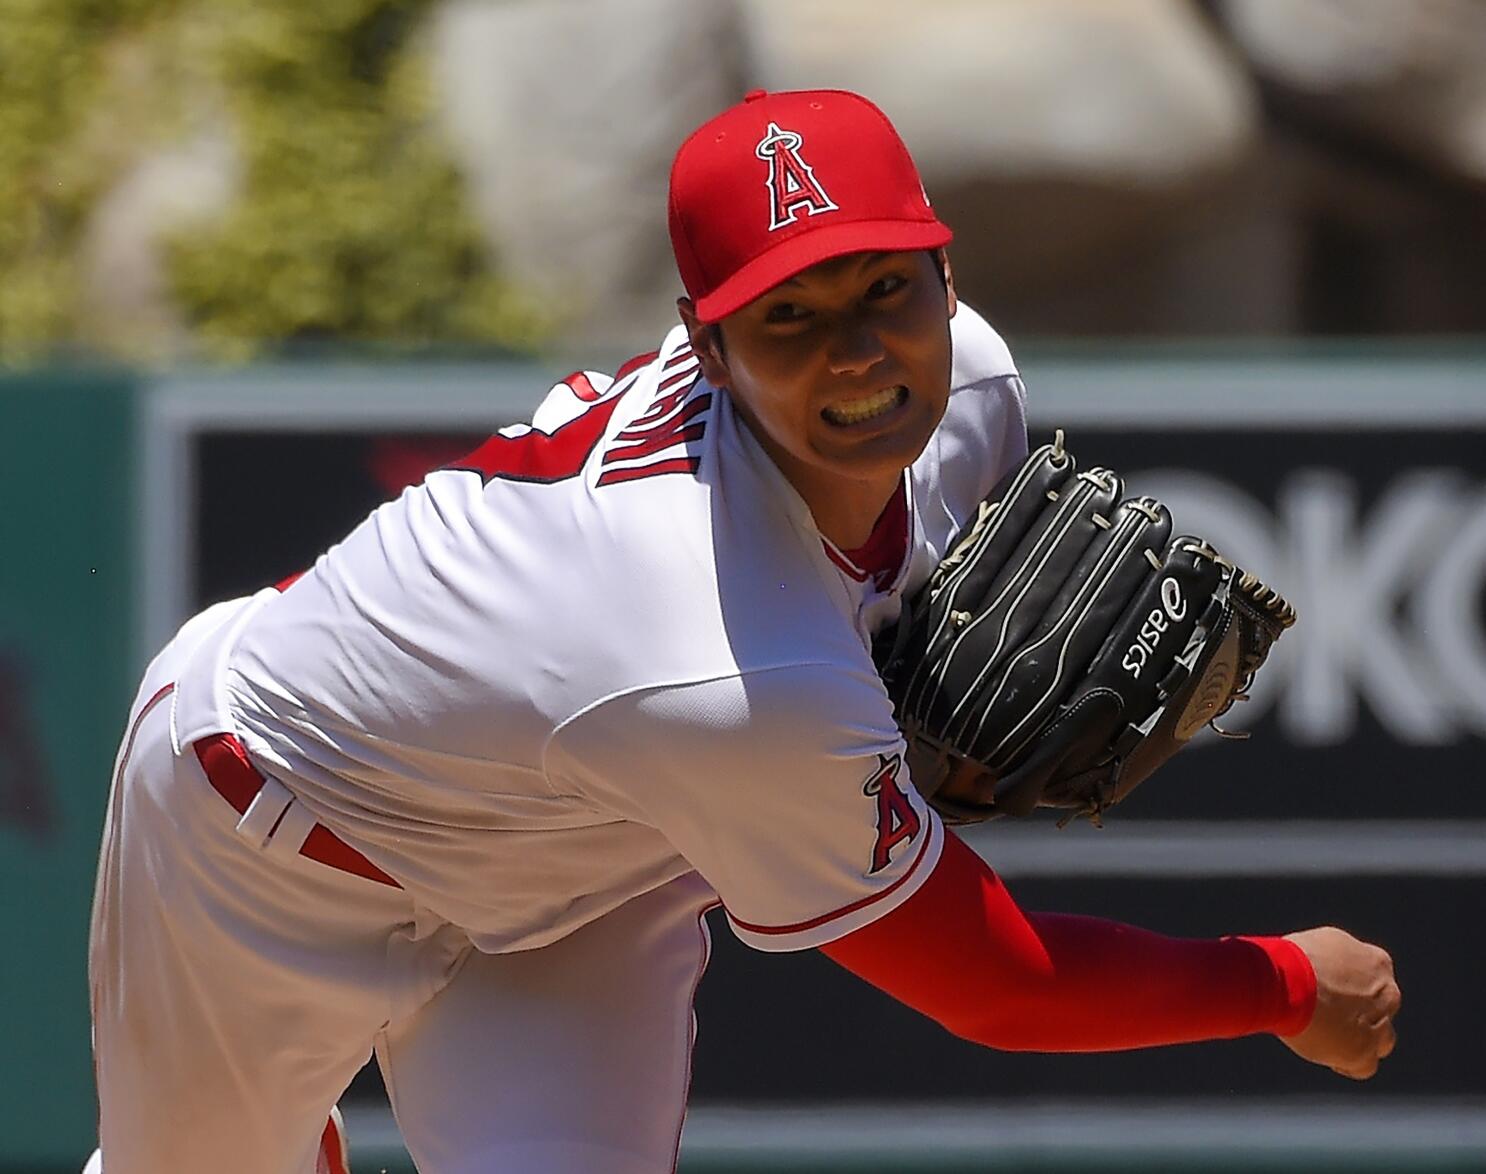 Angels' Ohtani having more fun, still chasing 2-way dreams - The